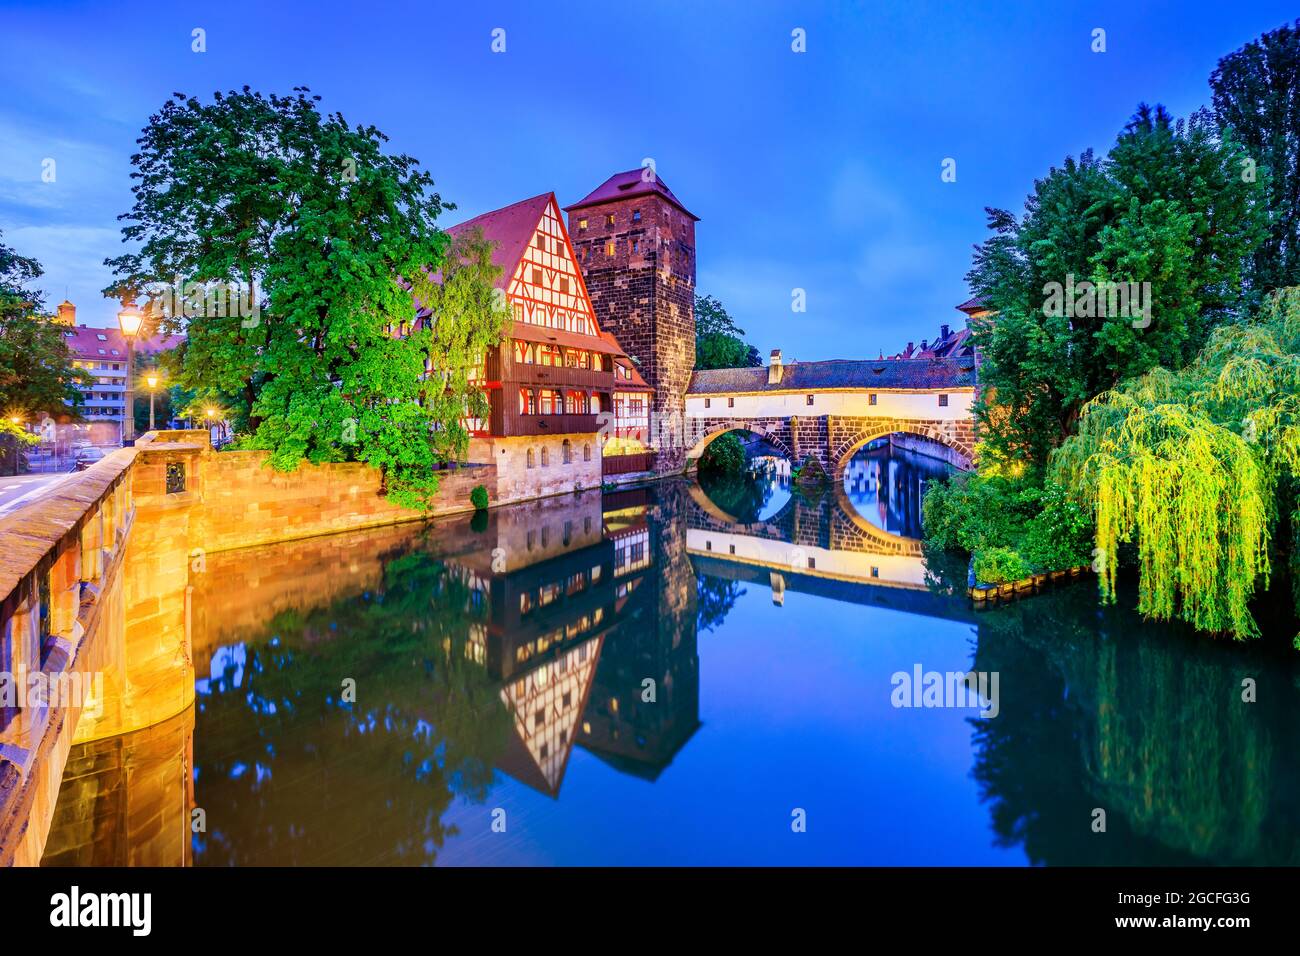 Nuremberg, Germany. The Wine Warehouse (Weinstadel) on the banks of the Pegnitz river. Stock Photo